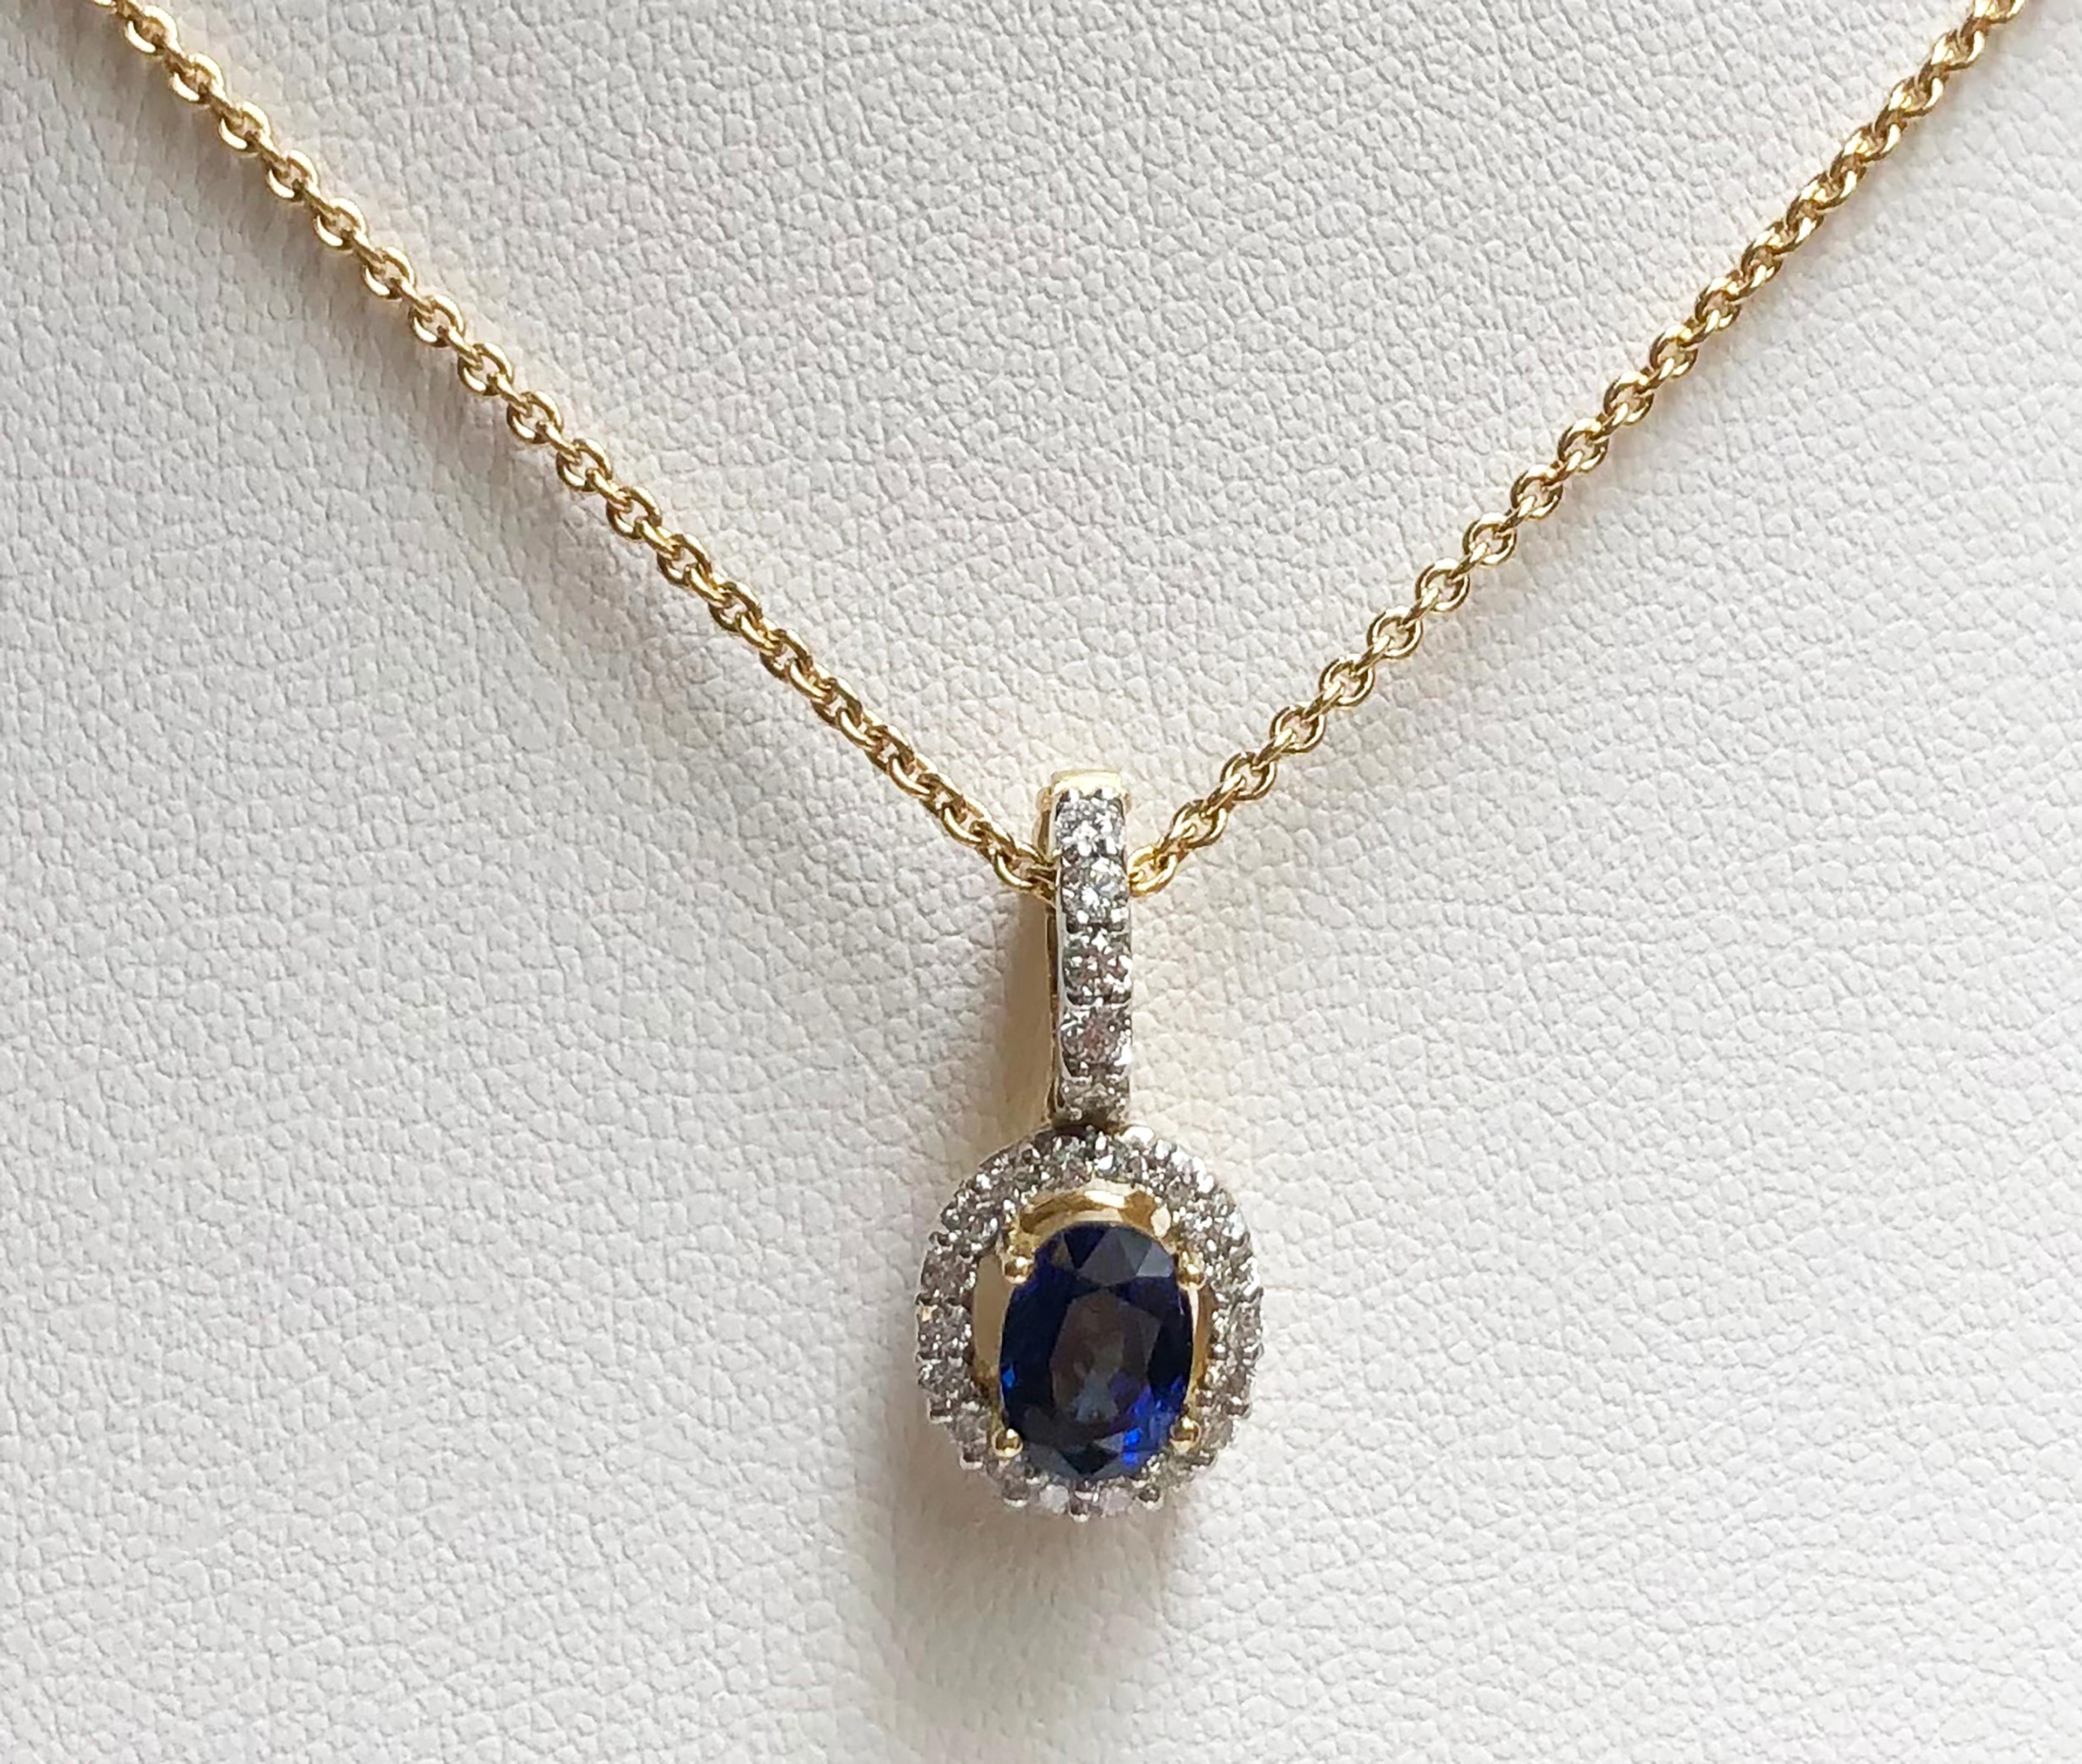 Blue Sapphire 1.28 carat with Diamond 0.30 carat Pendant set in 18 Karat Gold Settings
(chain not included)

Width:  0.9 cm 
Length: 1.9 cm
Total Weight: 2.52 grams

